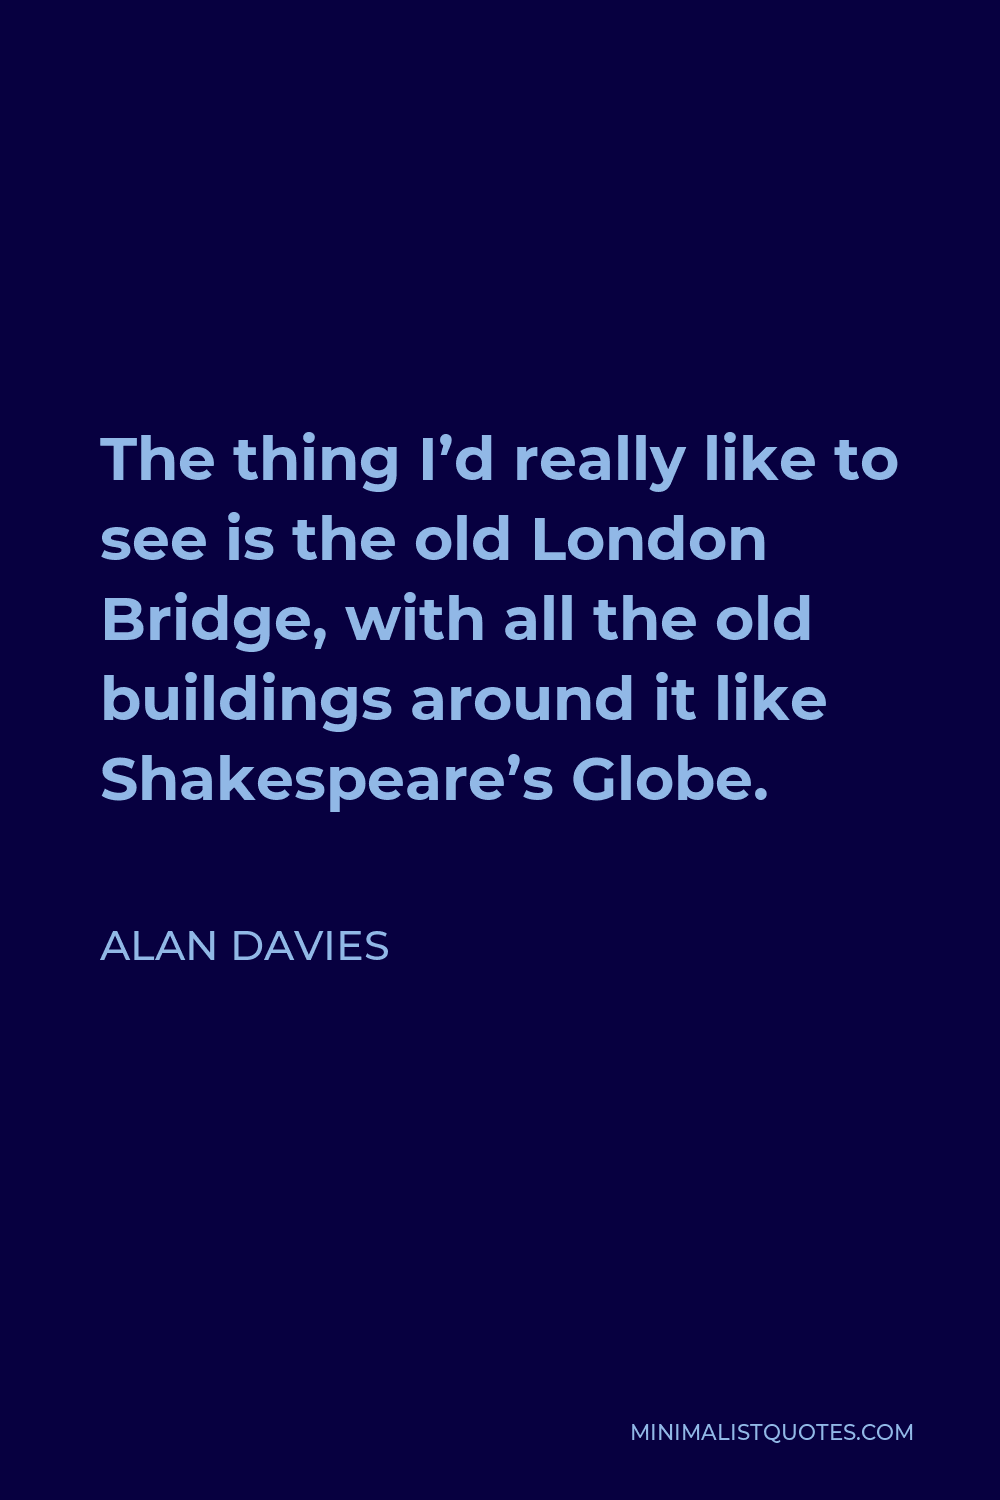 Alan Davies Quote - The thing I’d really like to see is the old London Bridge, with all the old buildings around it like Shakespeare’s Globe.